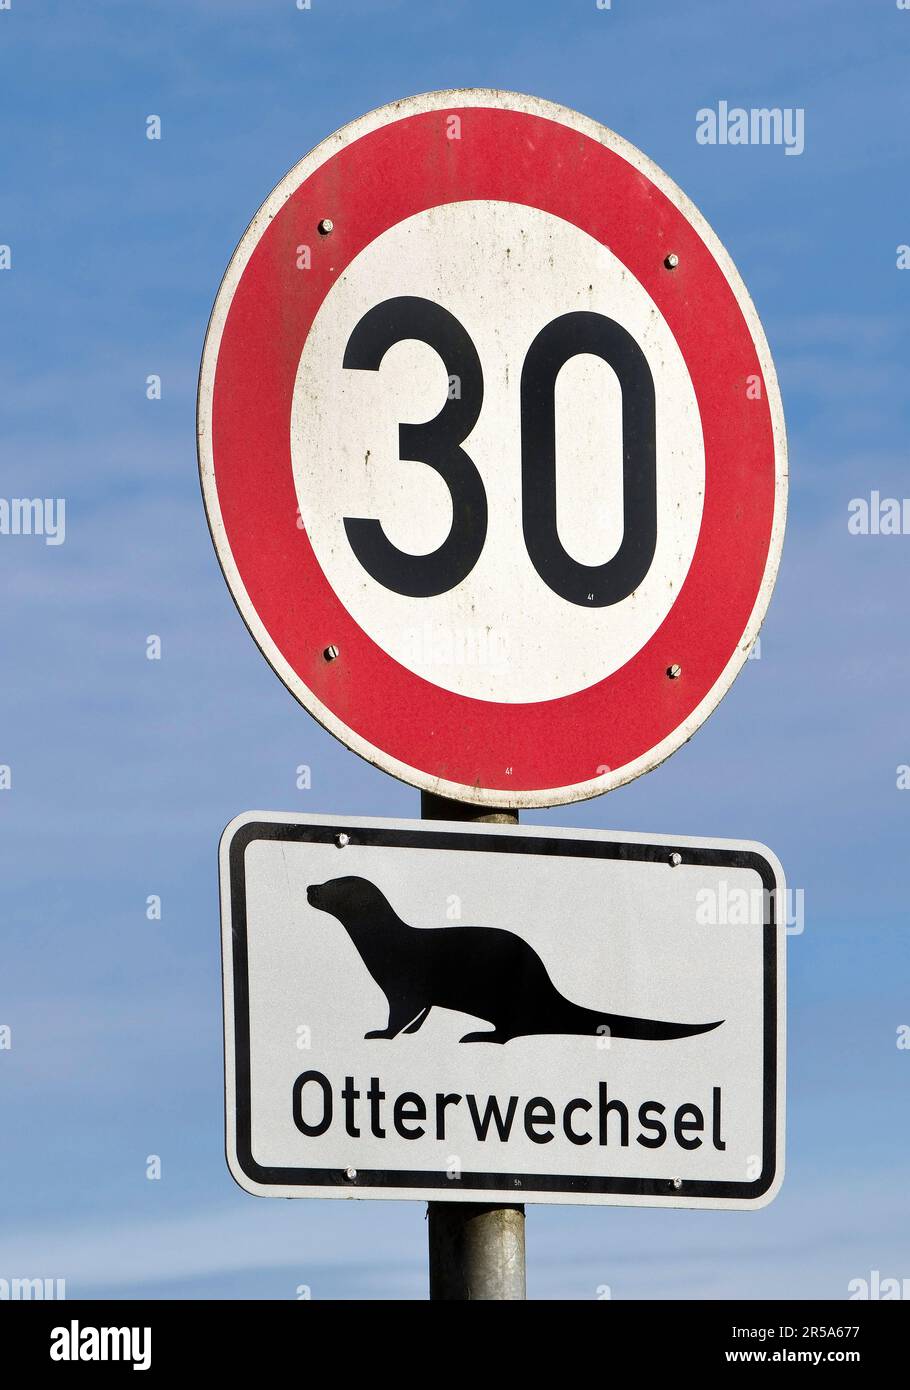 European river otter, European Otter, Eurasian Otter (Lutra lutra), traffic signs Speed limit 30 and otter trace, Germany, Schleswig-Holstein, Stock Photo